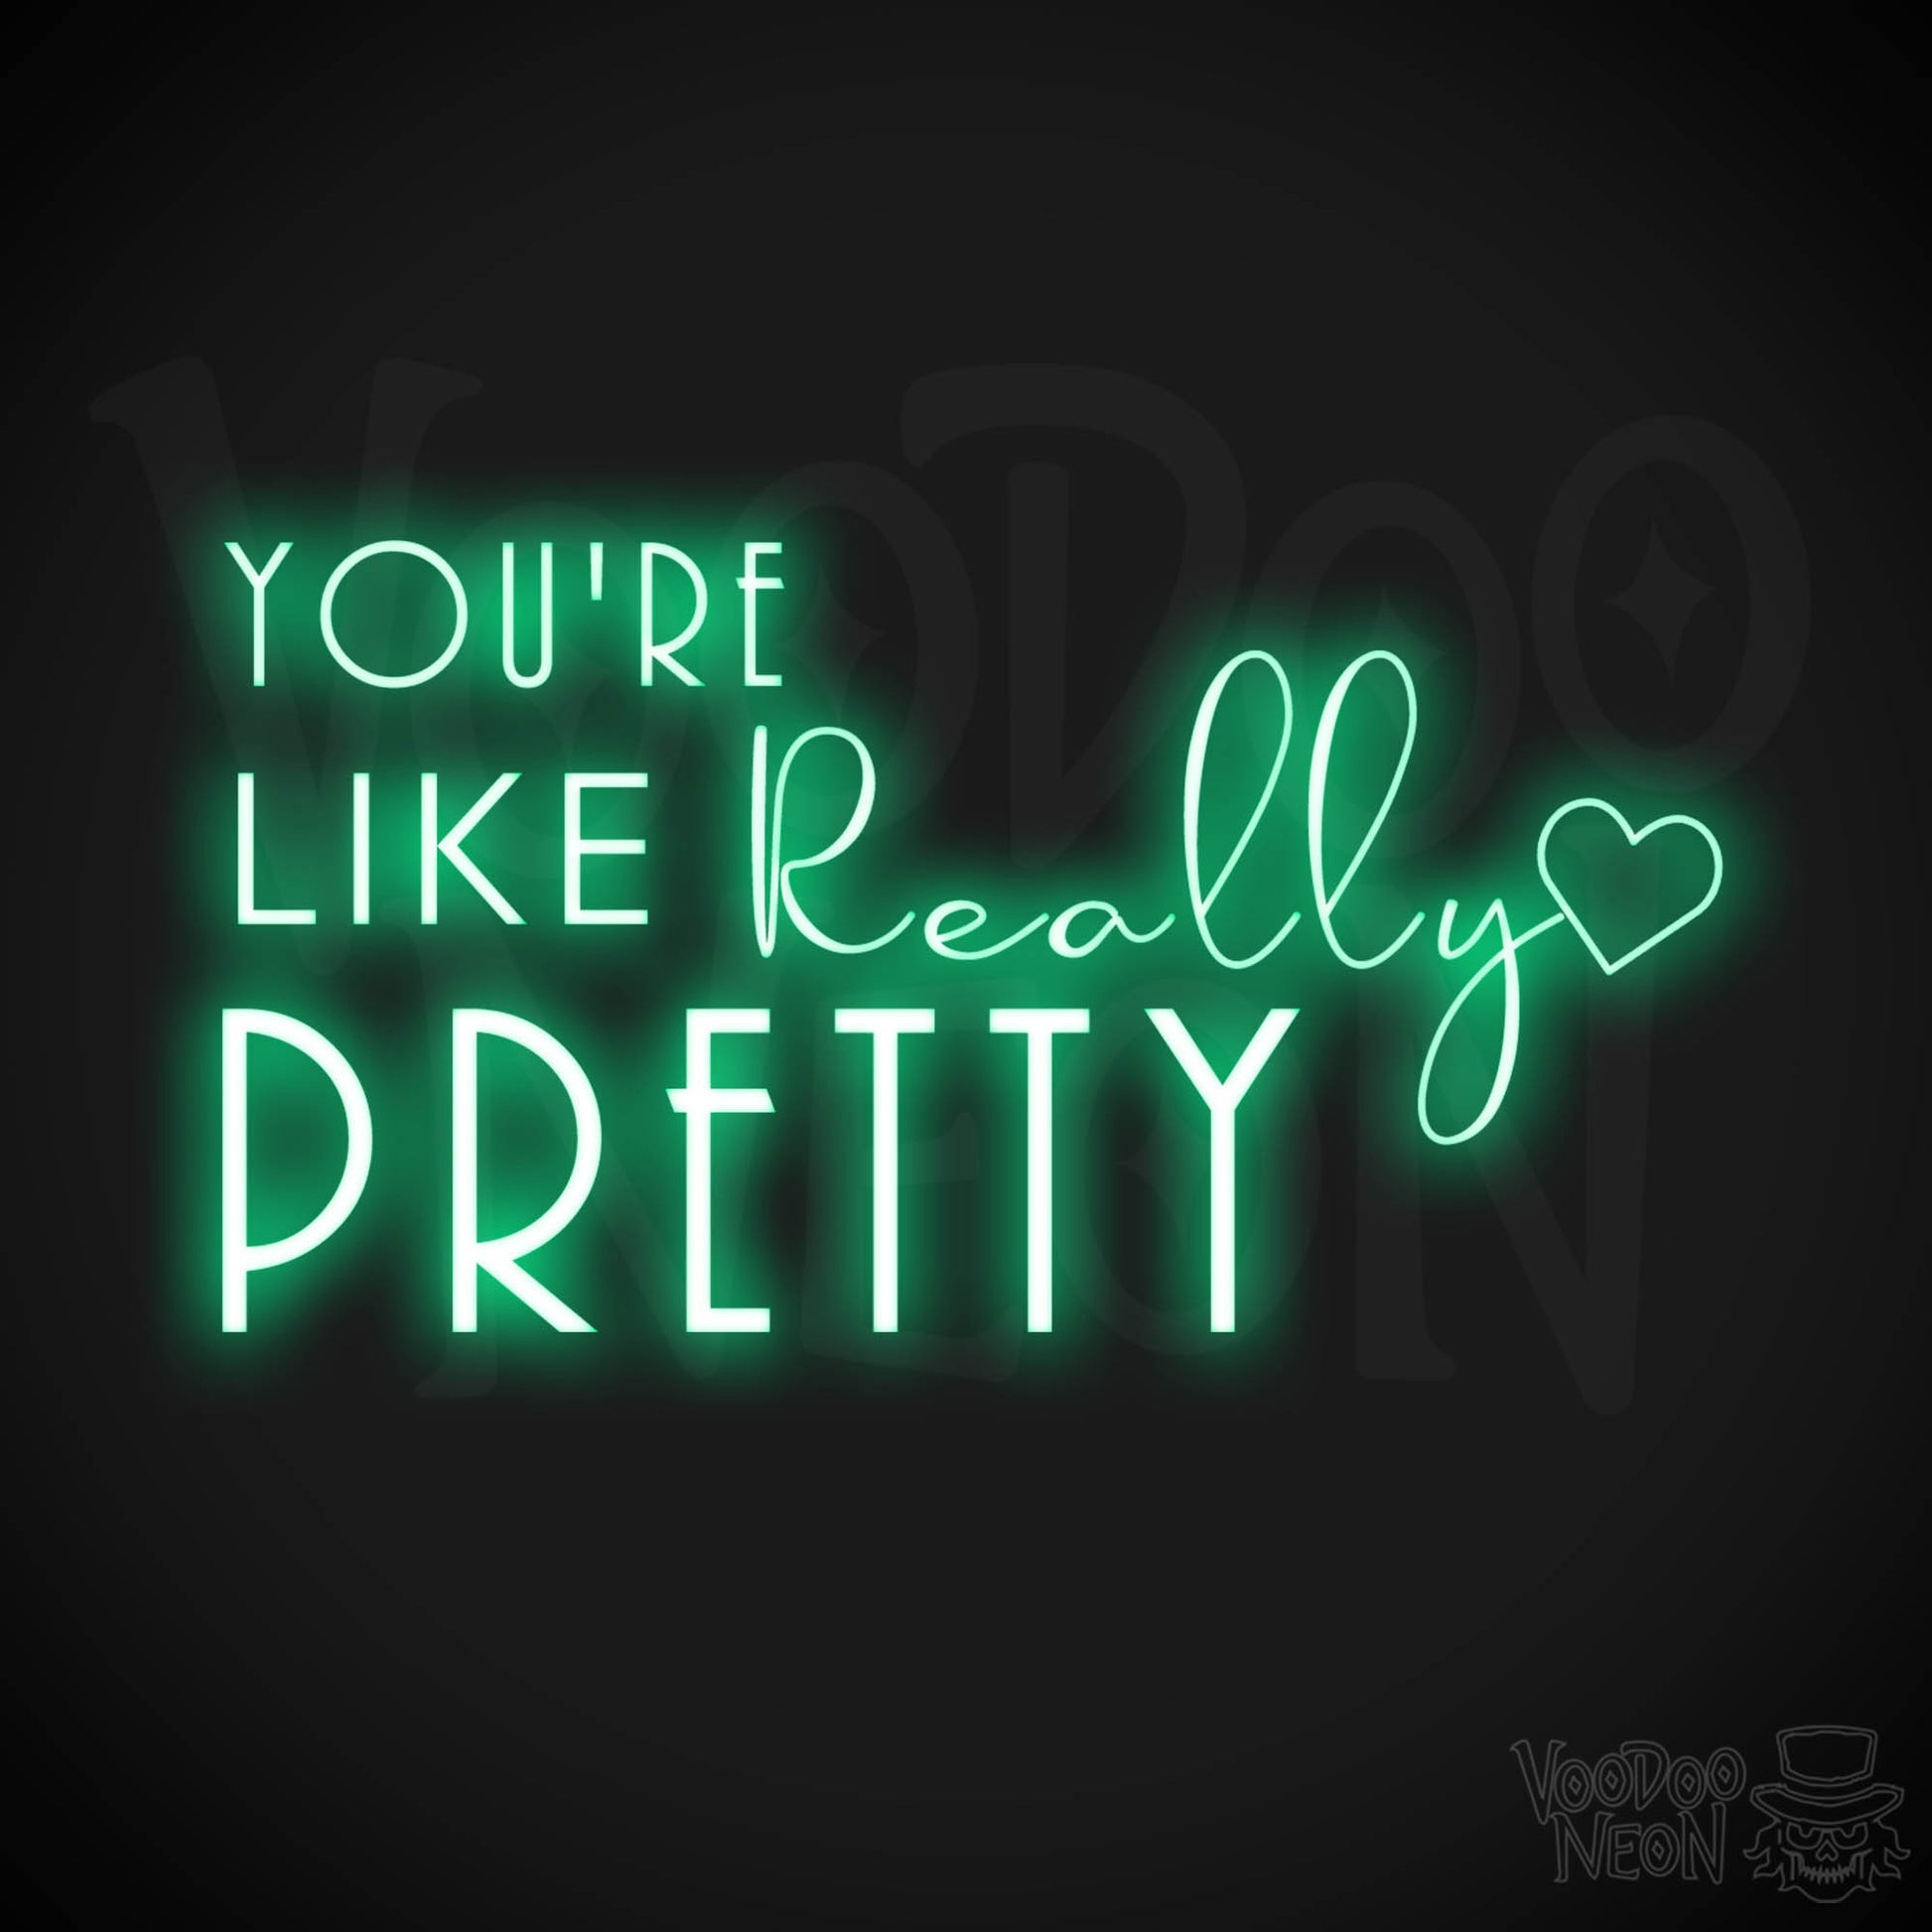 You're Like Really Pretty Neon Sign - Neon You're Like Really Pretty Sign - LED Wall Art - Color Green